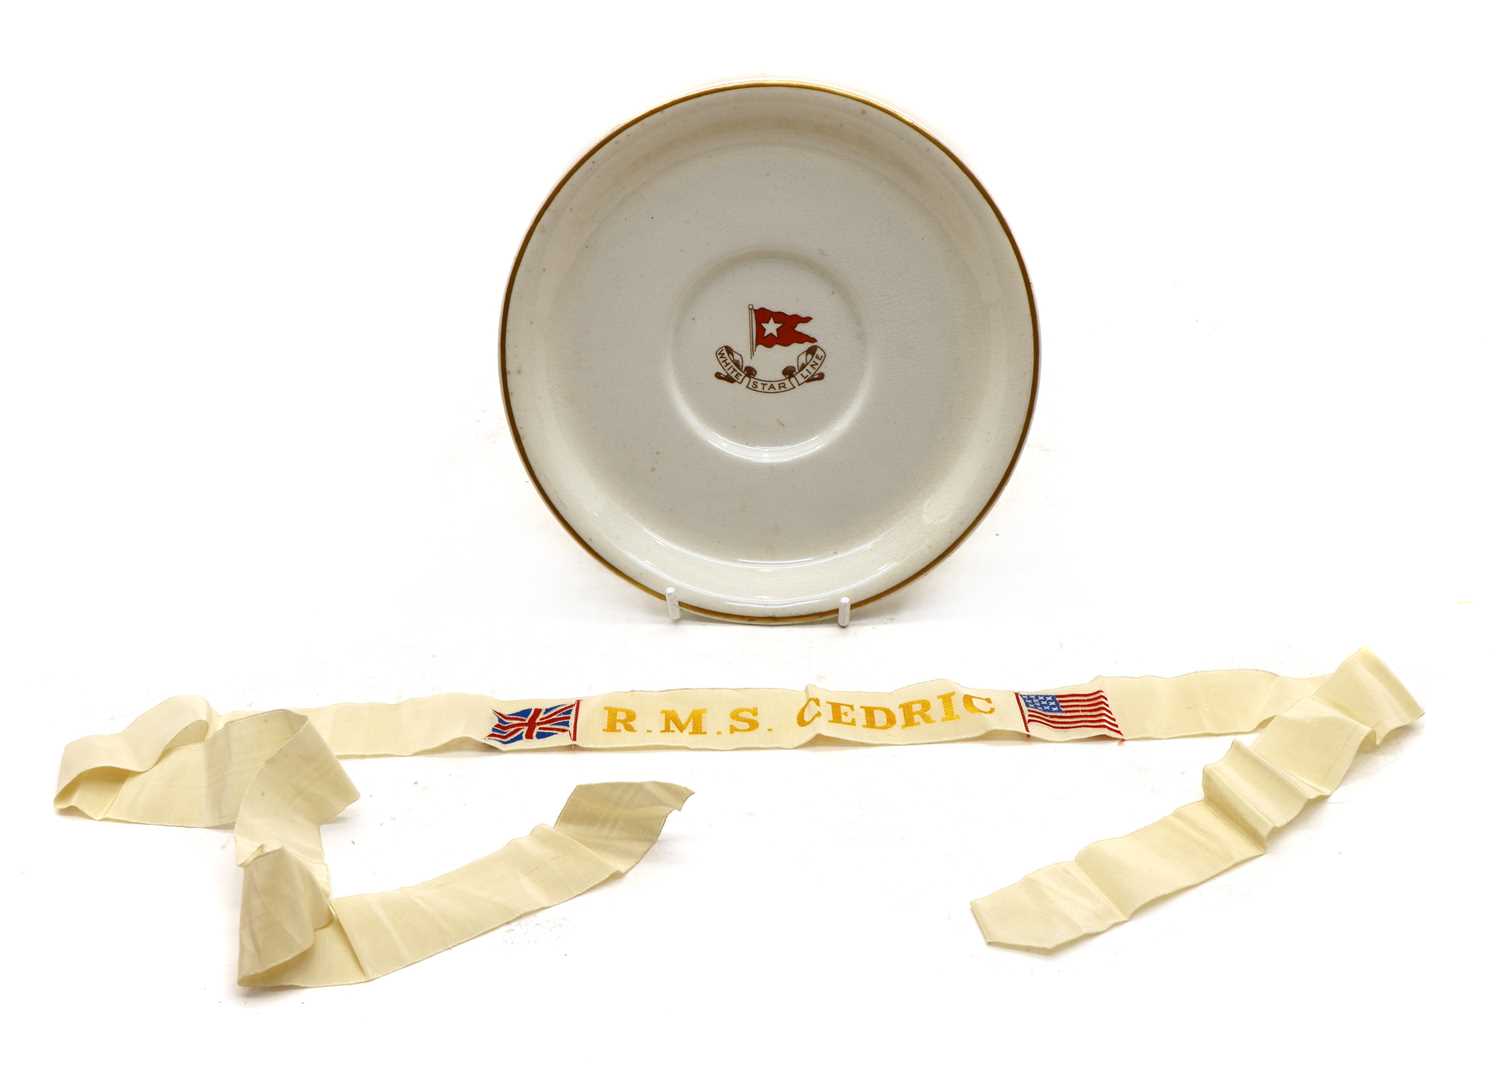 Lot 21 - R M S Cedric, a White Star Line plate and Sailor's Cap Tally for R M S Cedric